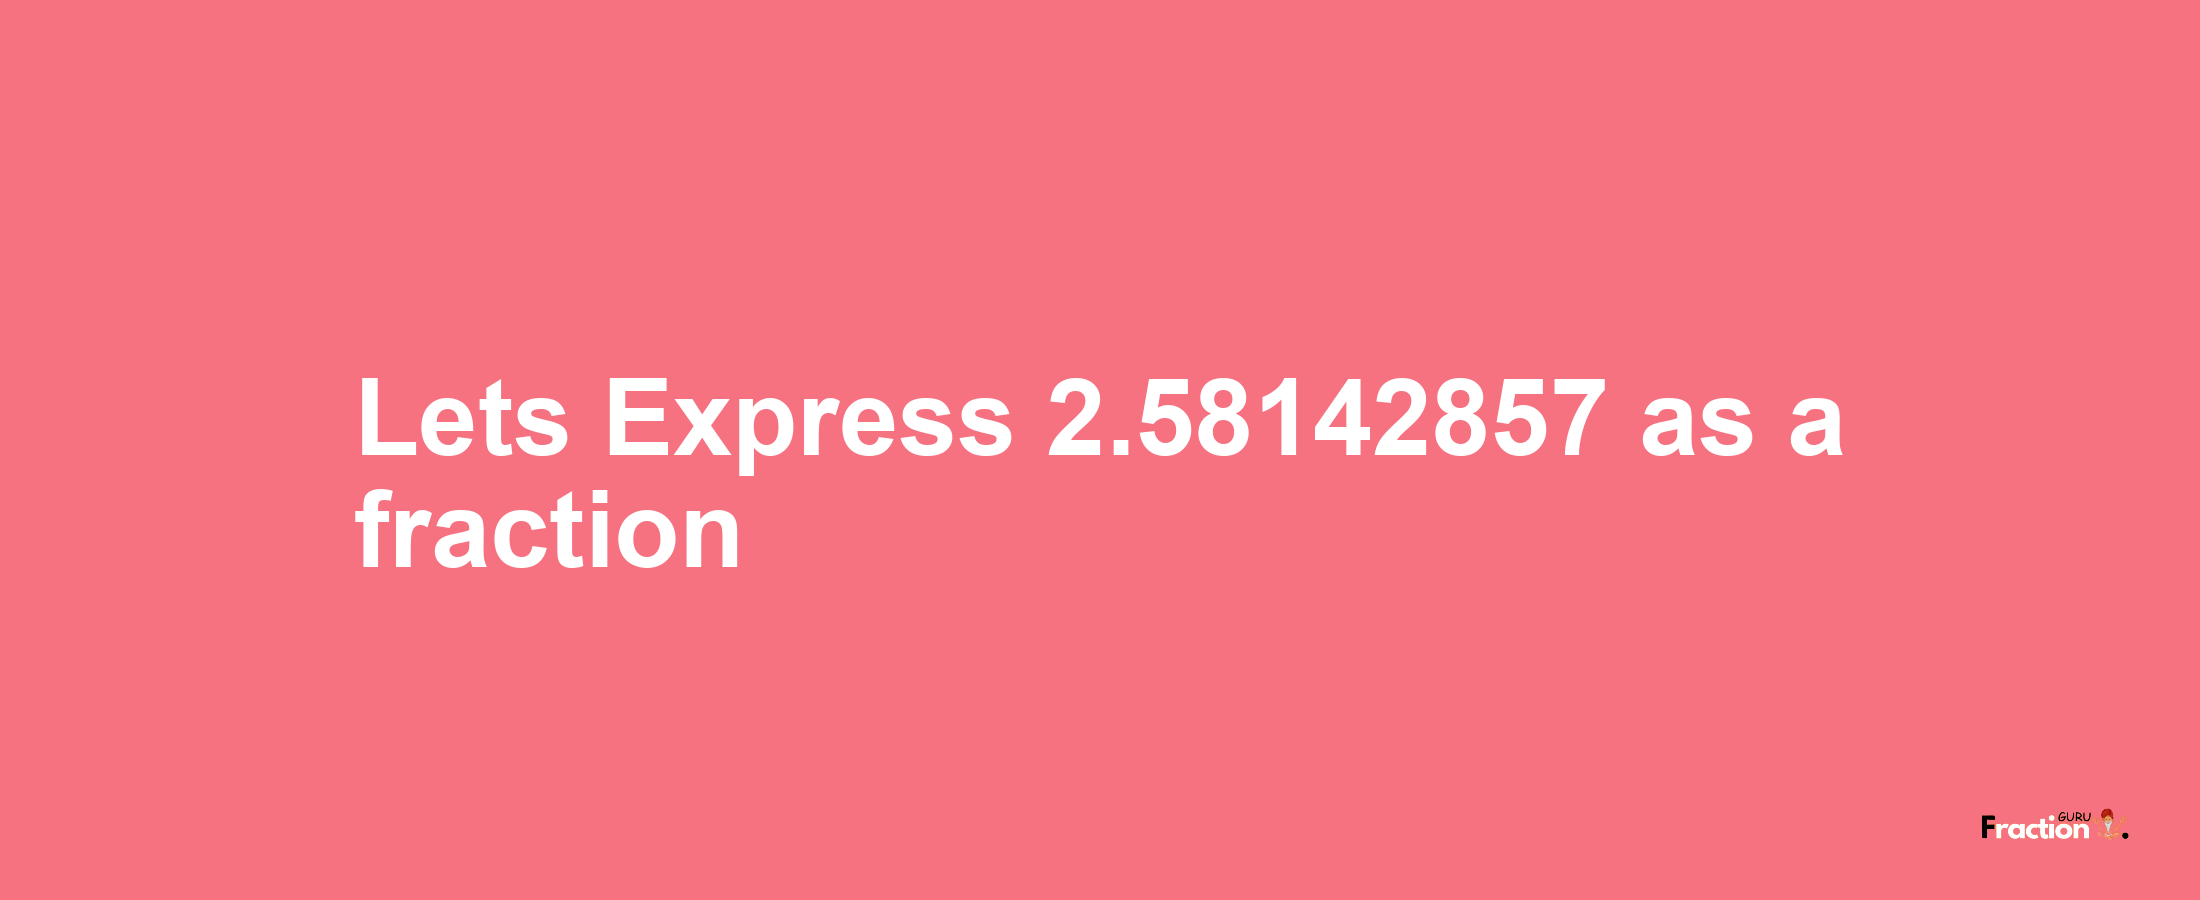 Lets Express 2.58142857 as afraction